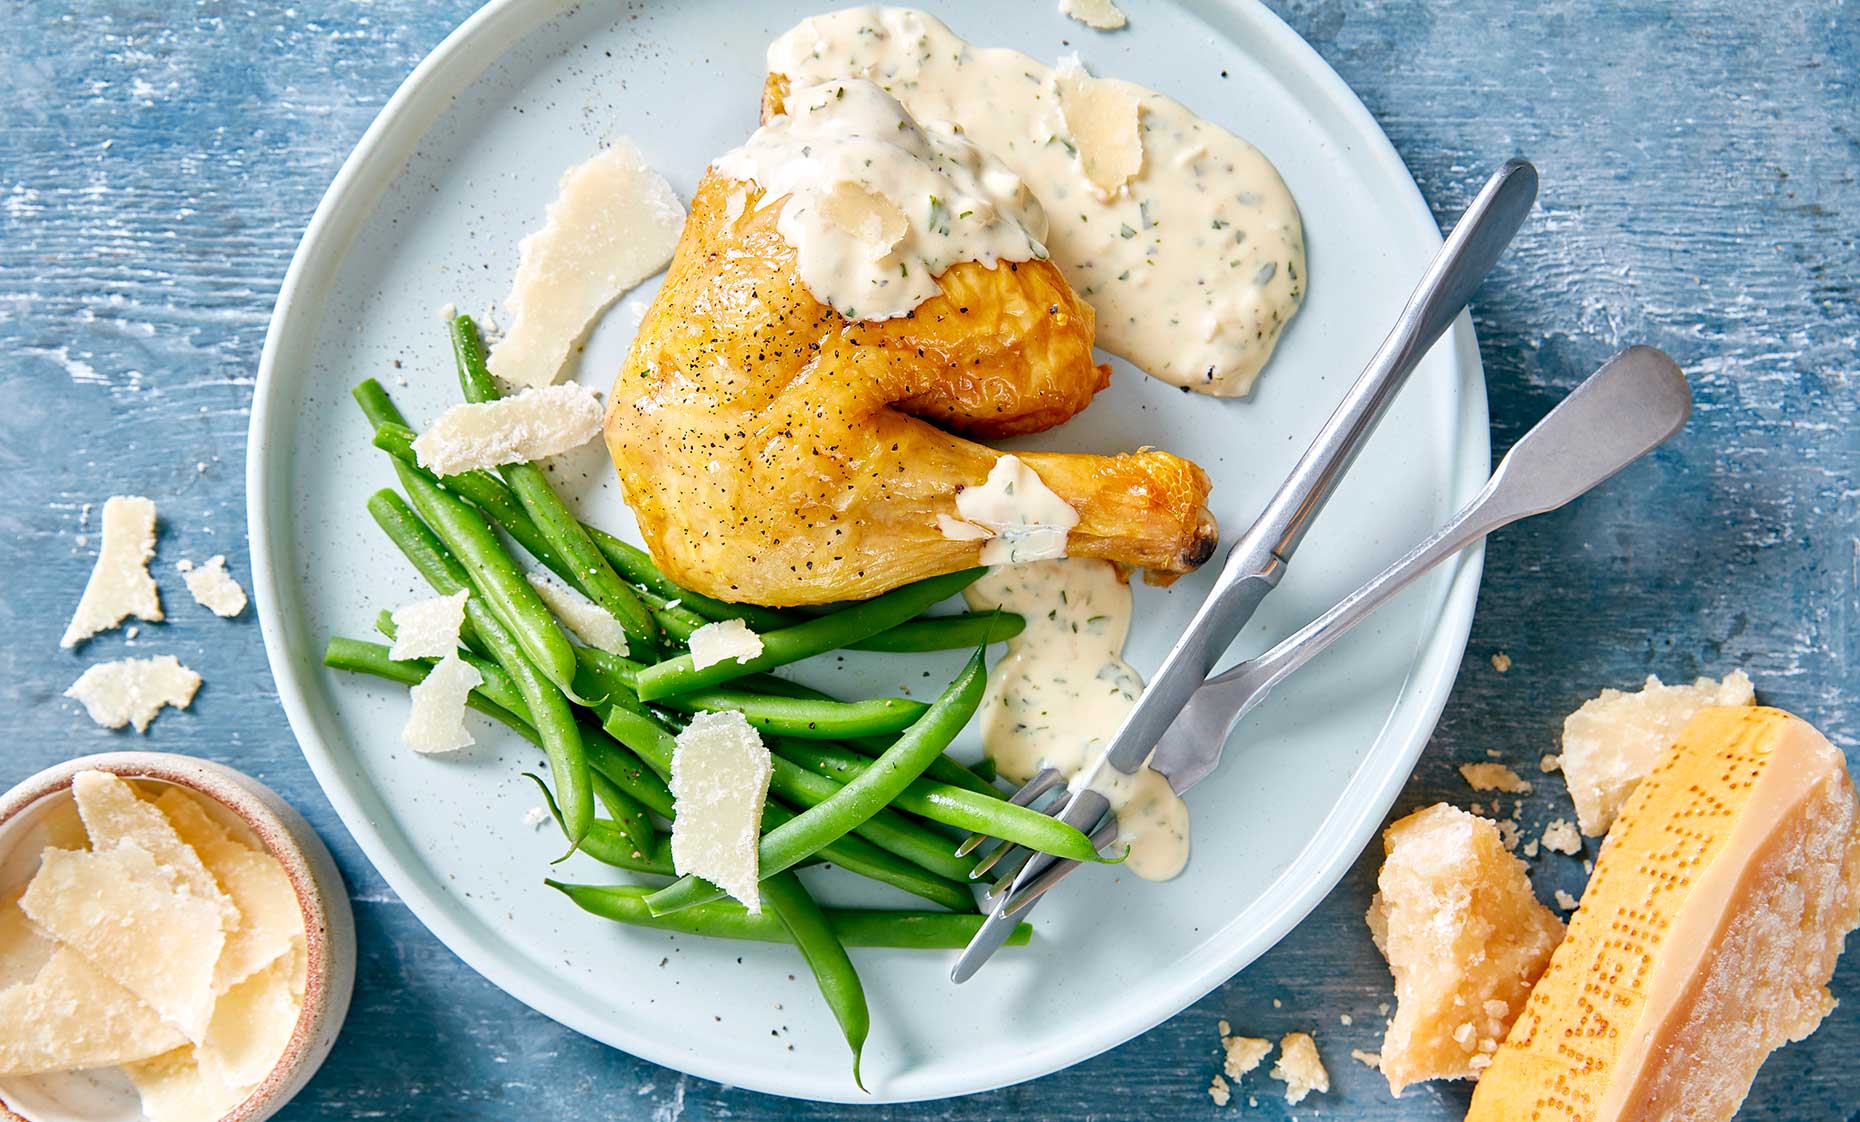 Roast chicken with Parmesan sauce (Image: Photographed and styled at Steve Lee Studios, courtesy of Parmigiano Reggiano)